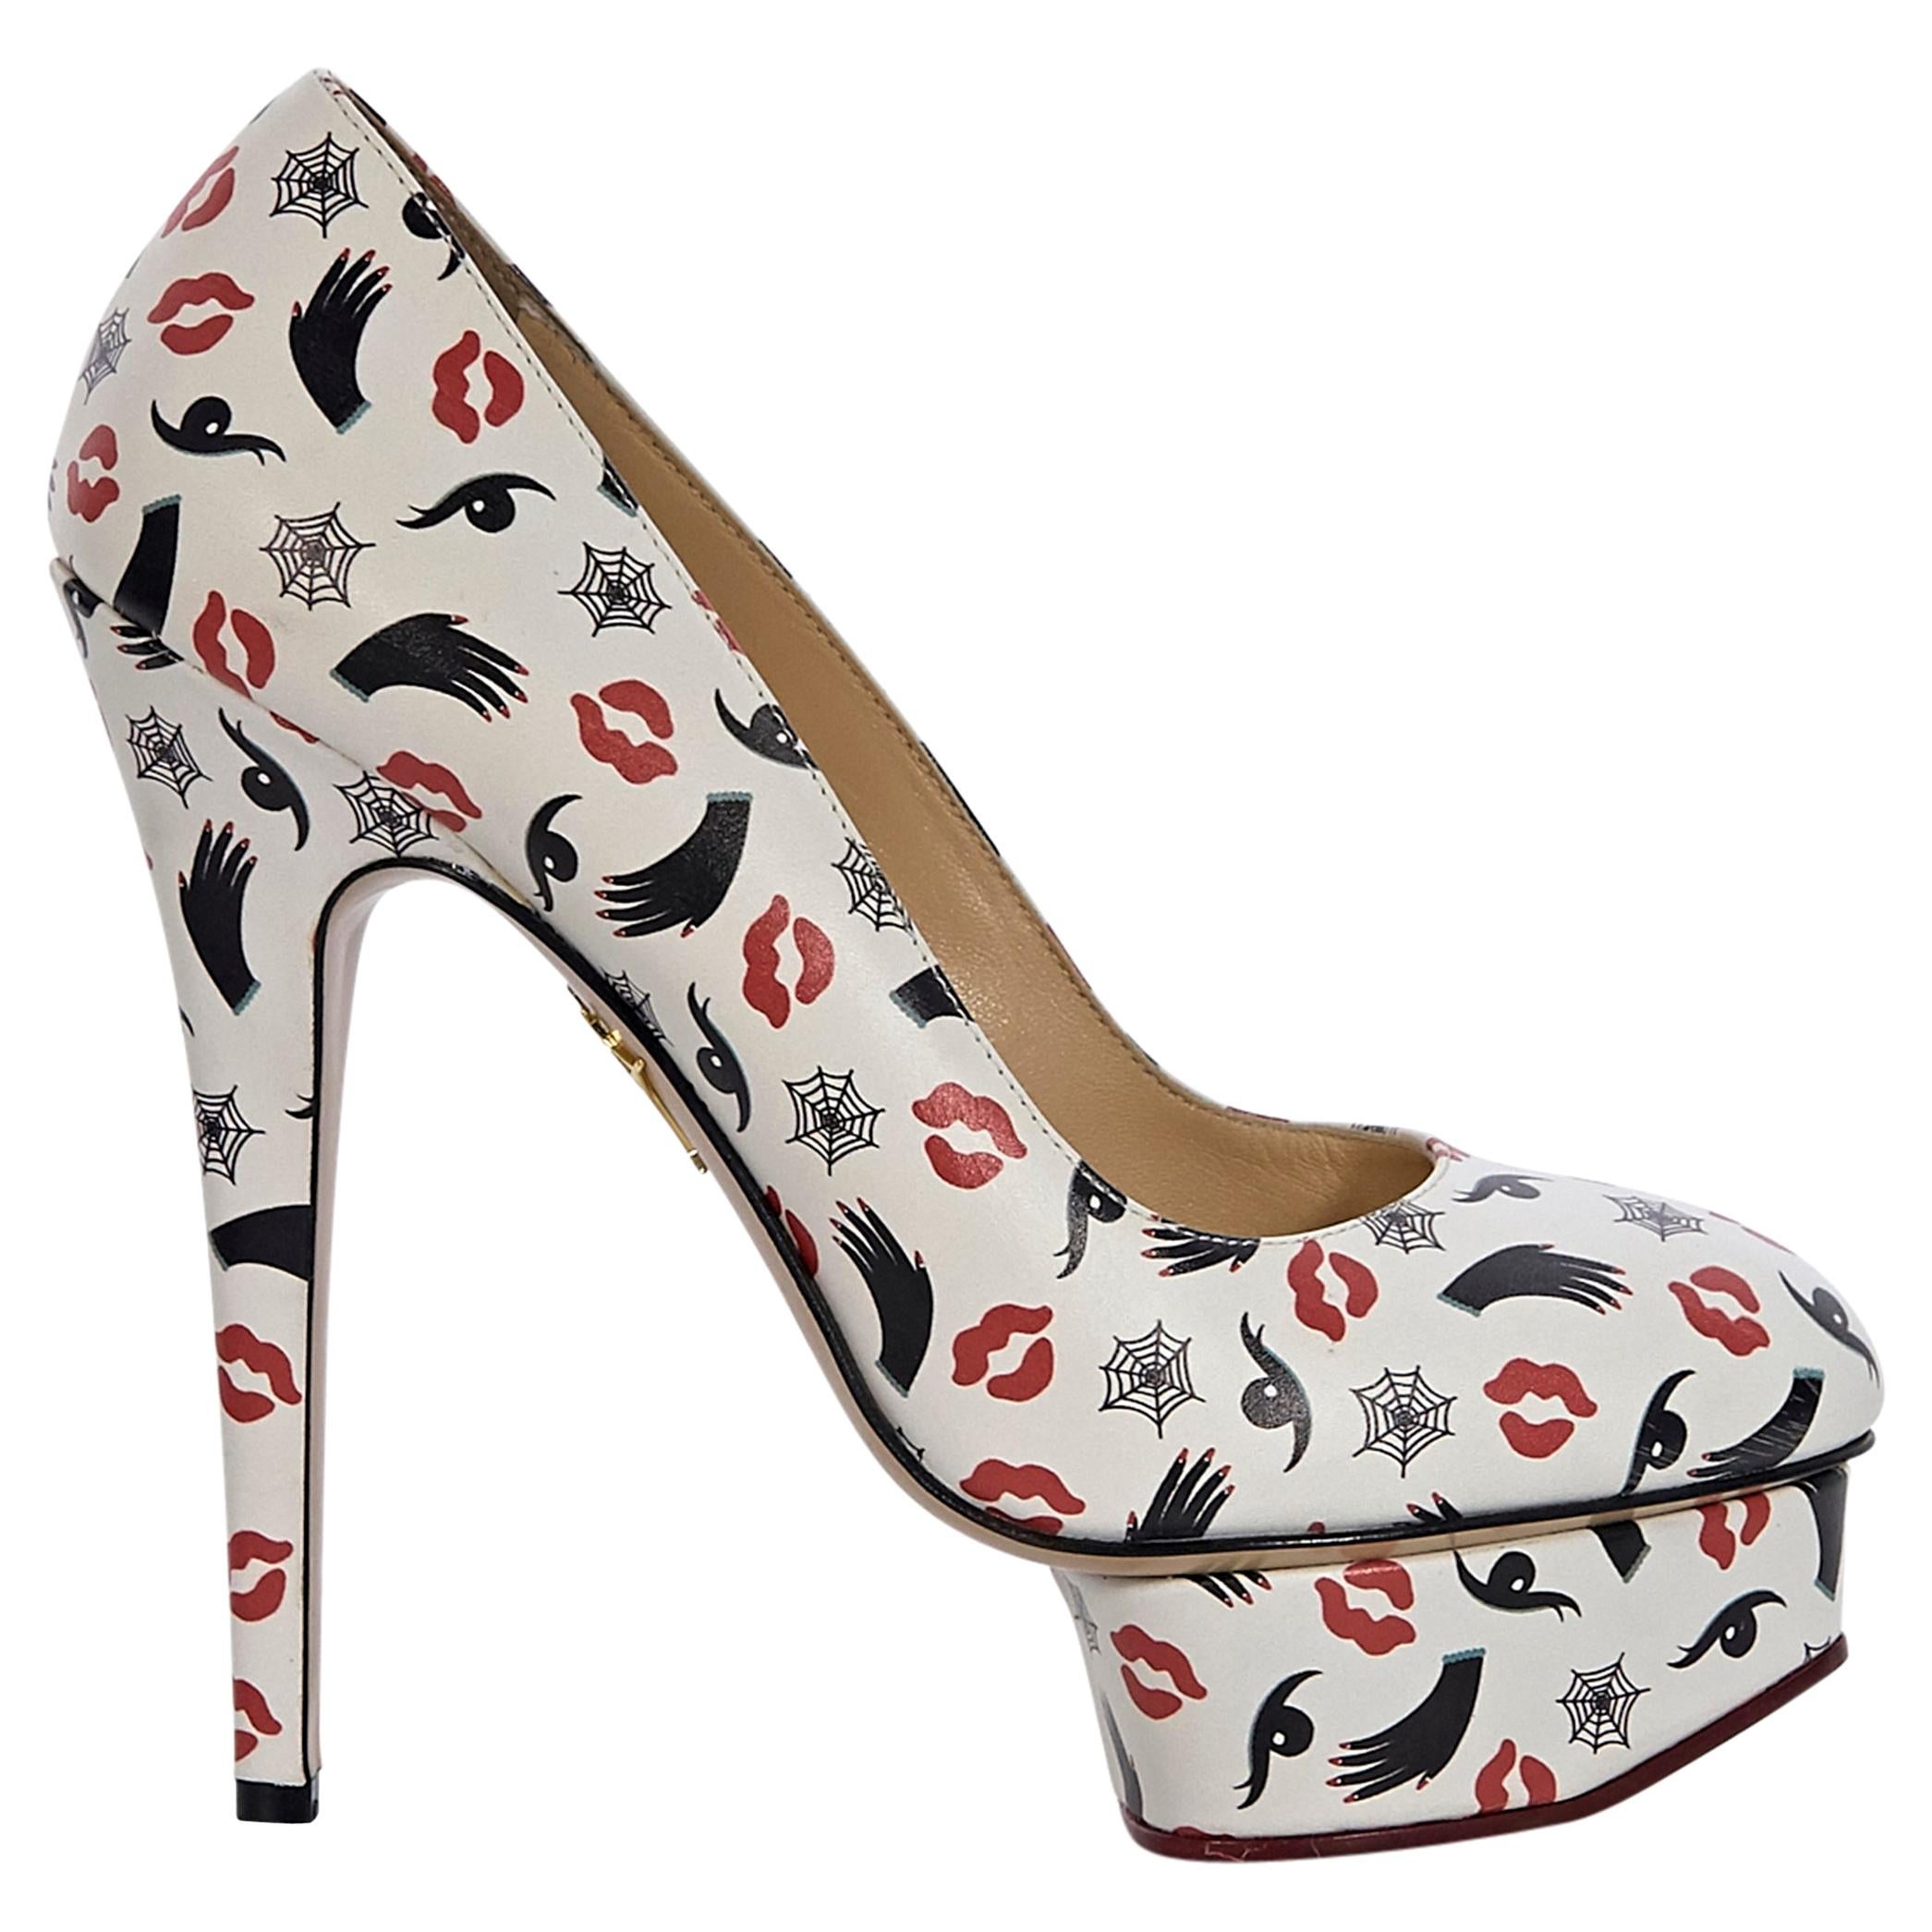 Charlotte Olympia White Leather Printed Platform Pumps